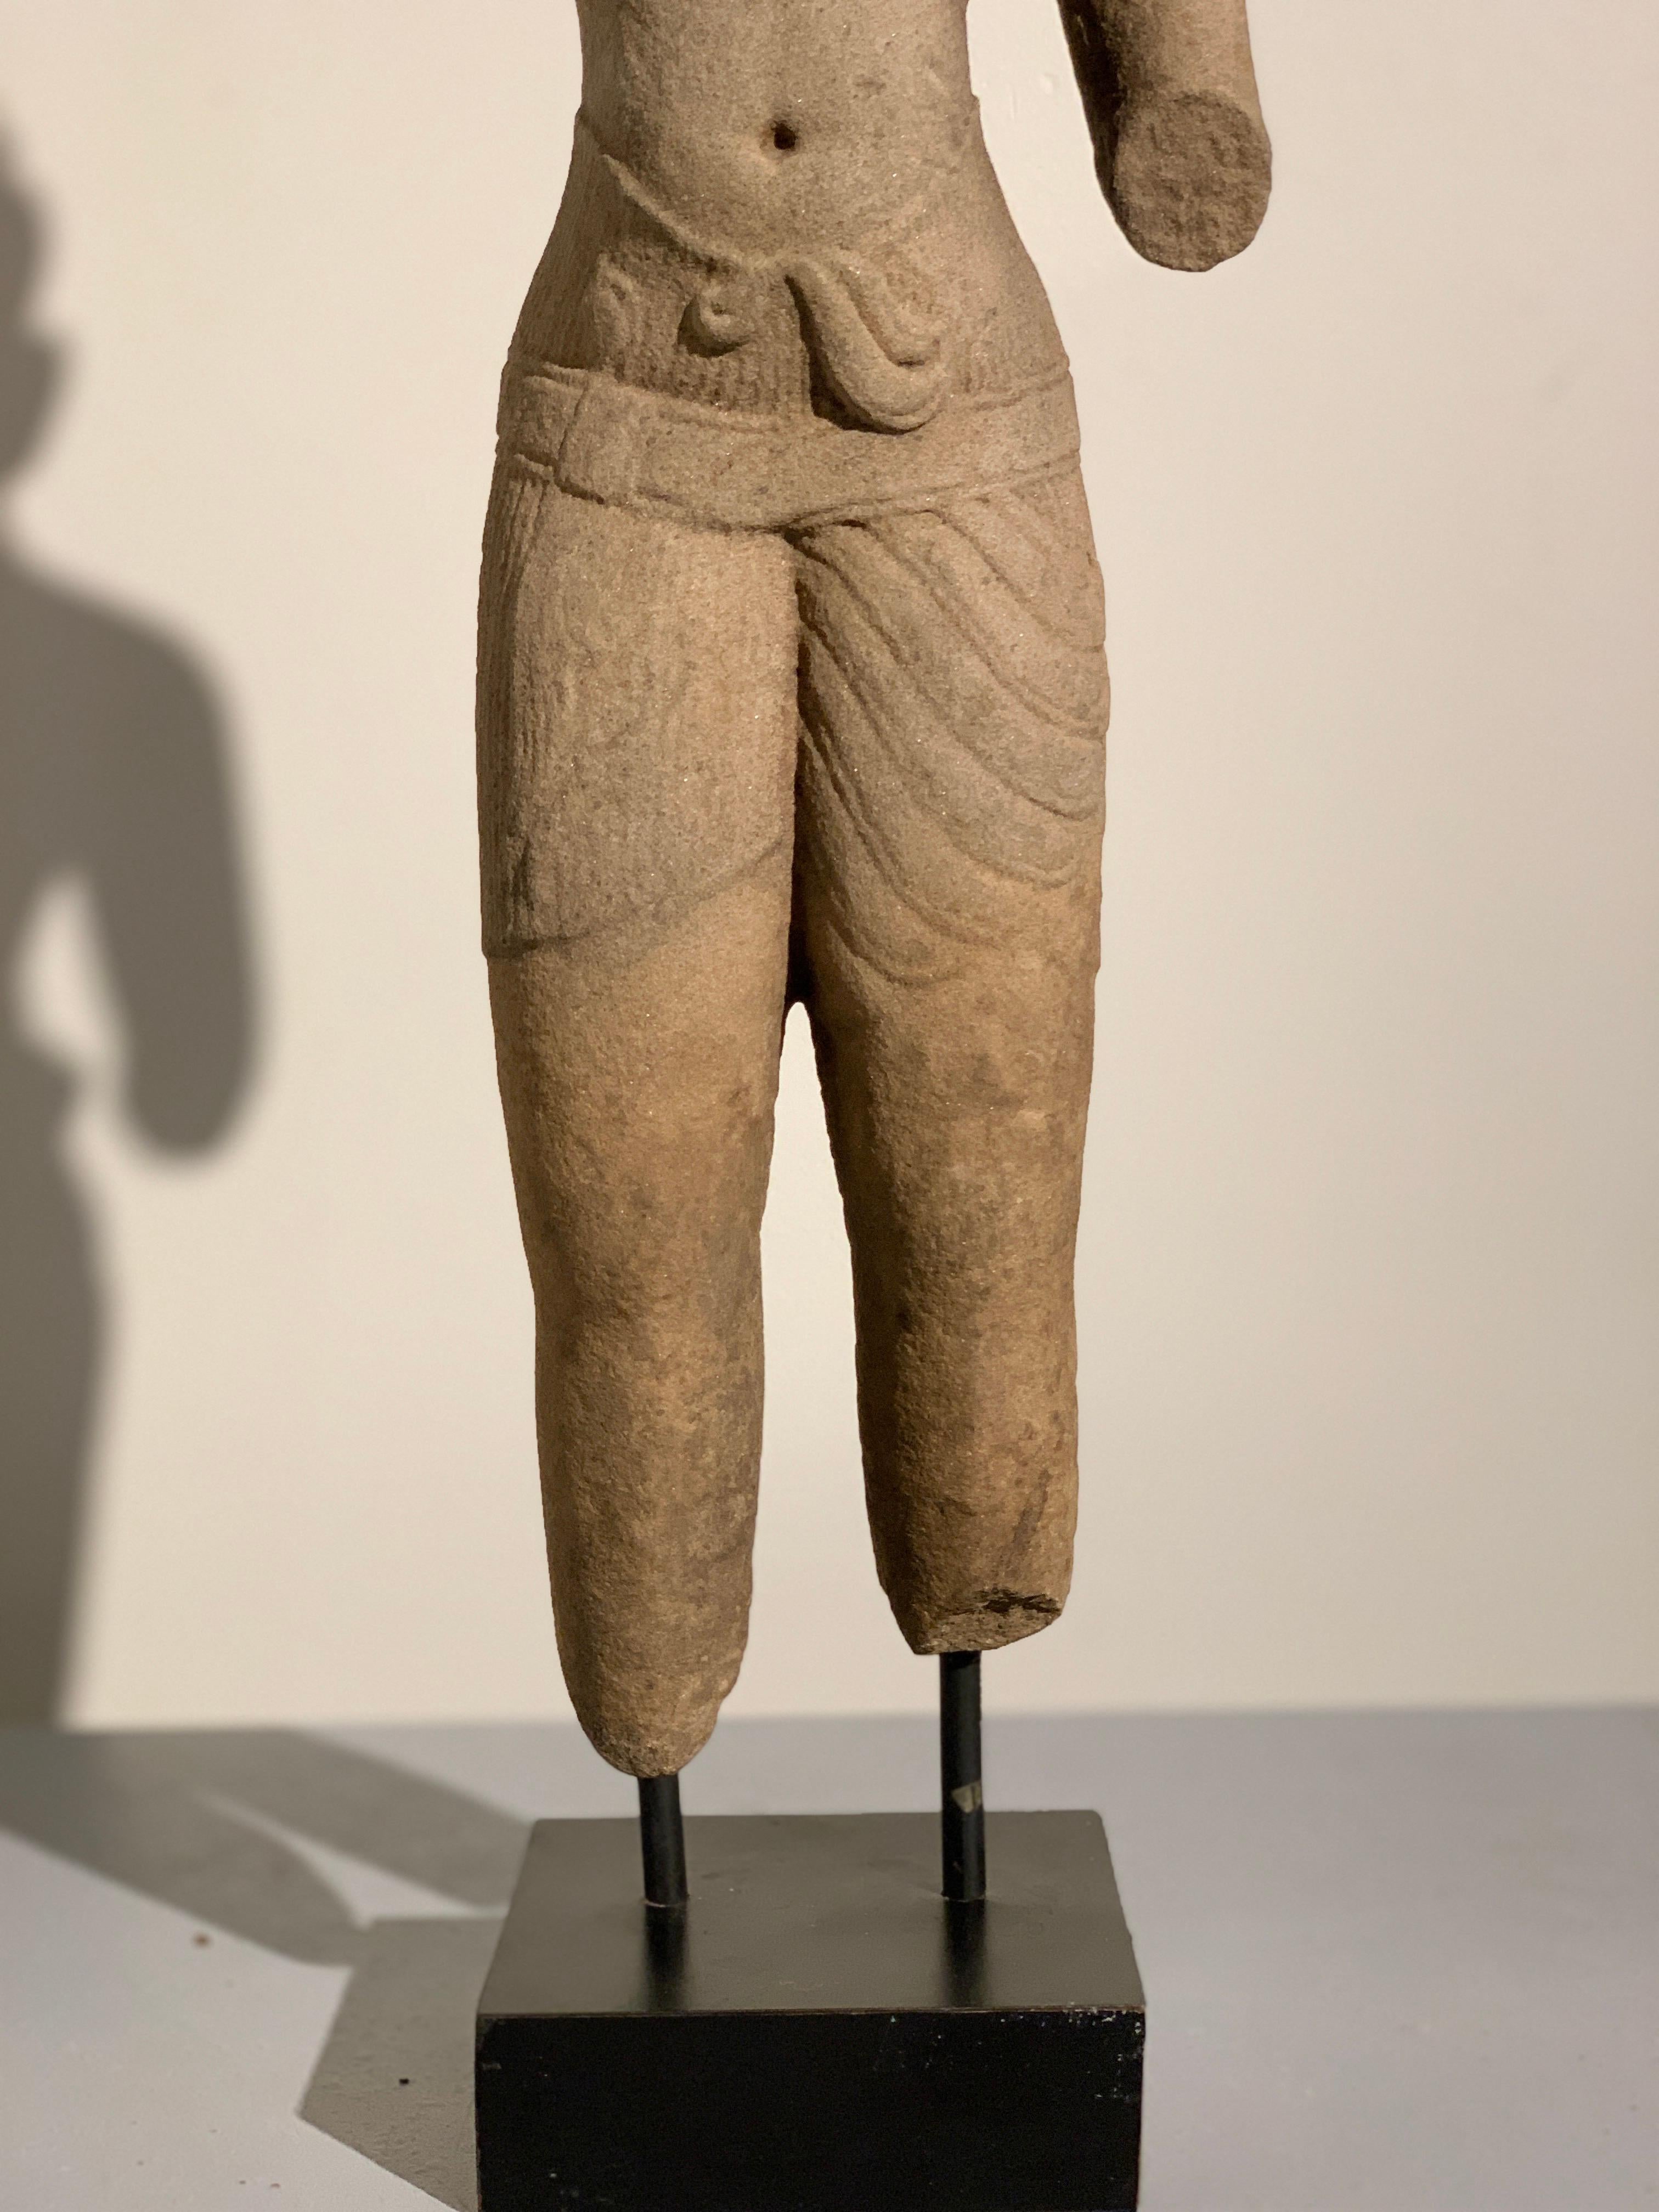 Khmer Carved Sandstone Male Deity, Style of the Baphoun, 11th Century For Sale 1